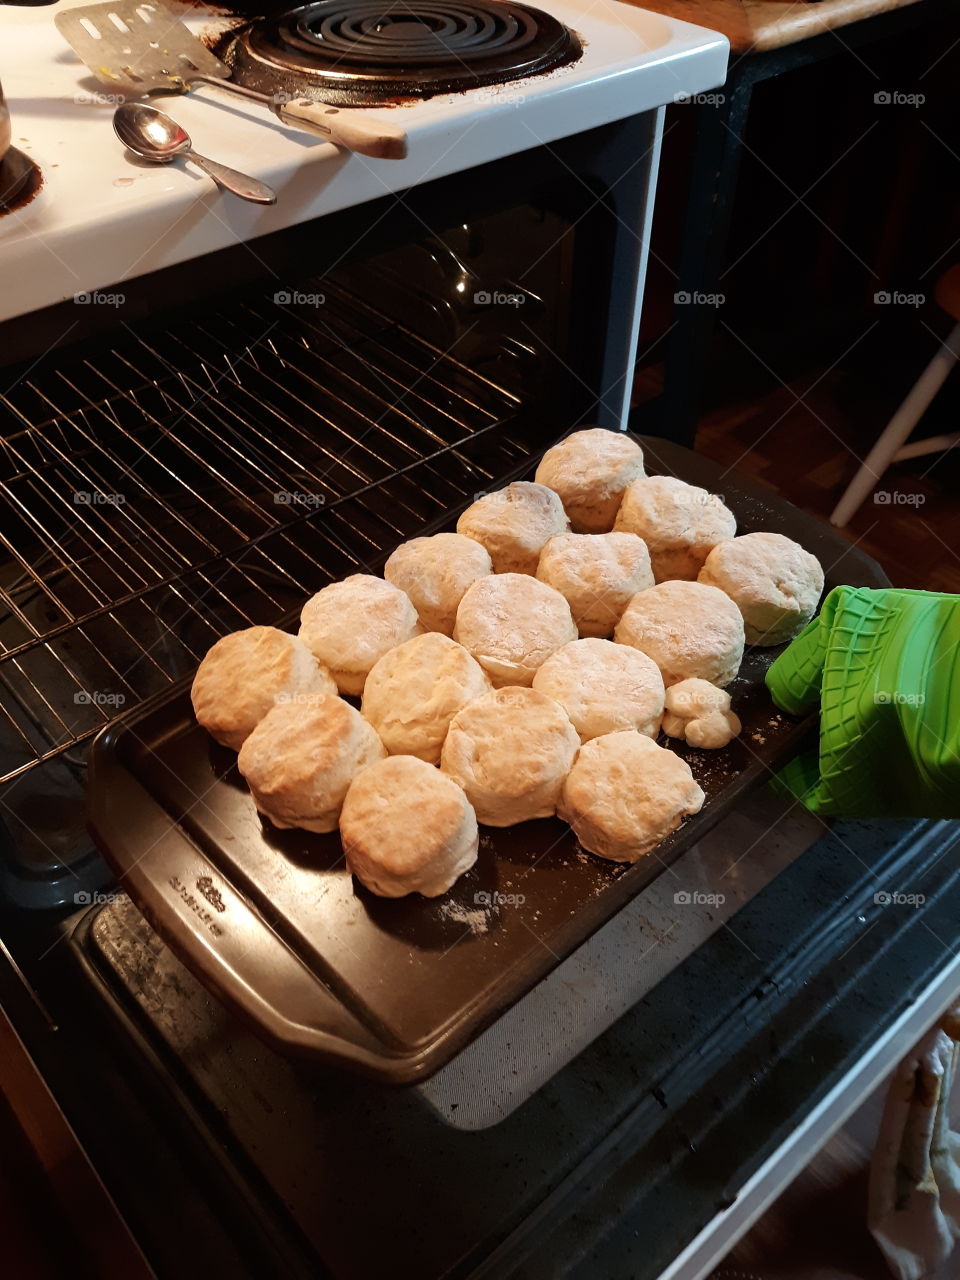 Fresh, hot biscuits right from the oven